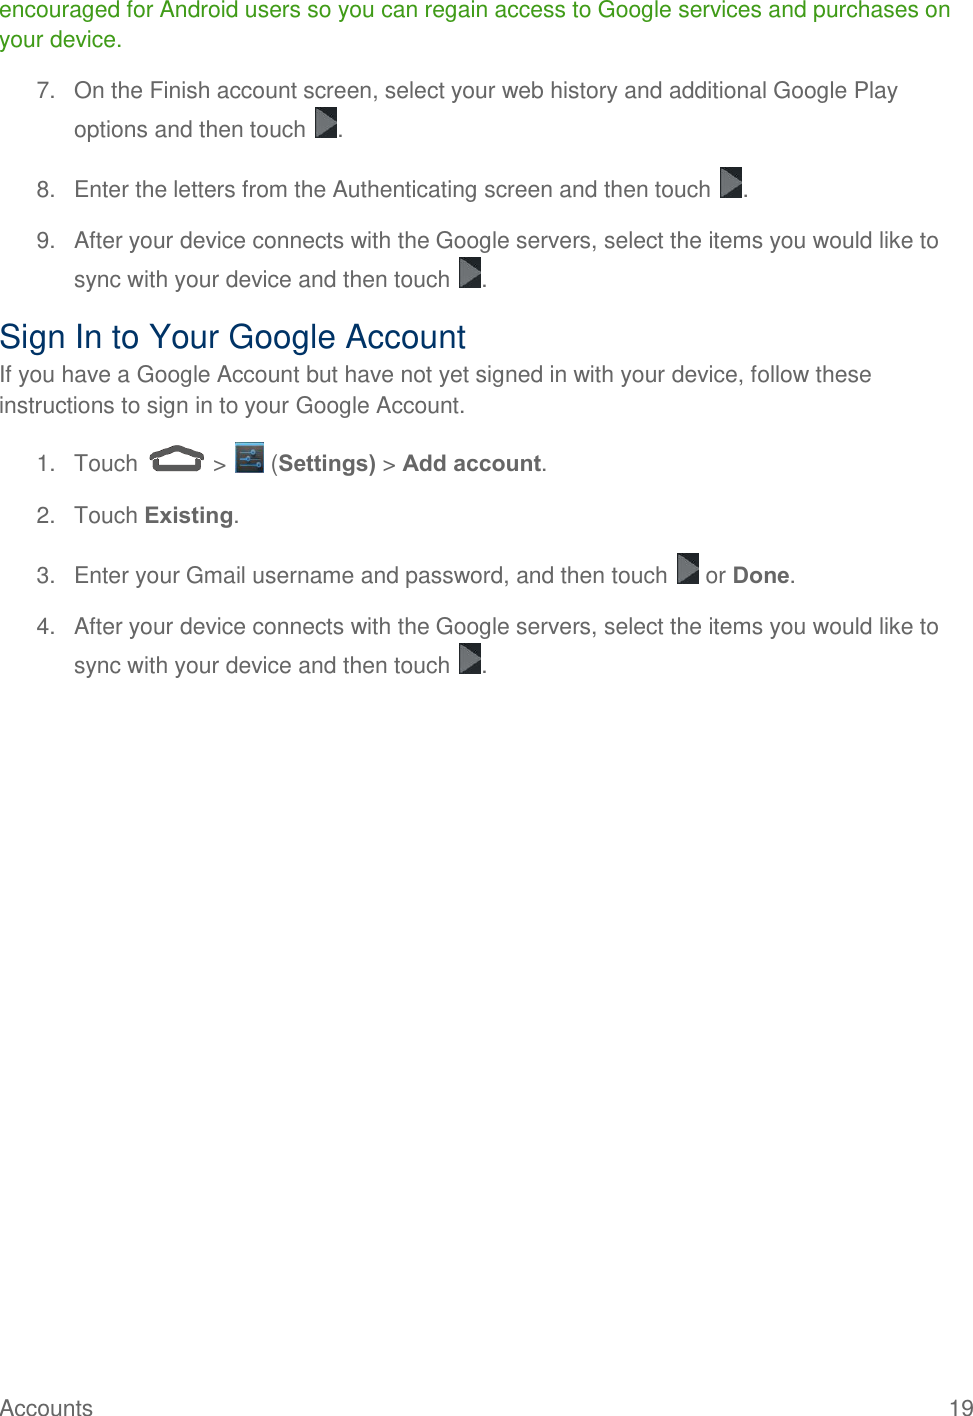  Accounts  19   encouraged for Android users so you can regain access to Google services and purchases on your device. 7.  On the Finish account screen, select your web history and additional Google Play options and then touch  . 8.  Enter the letters from the Authenticating screen and then touch  . 9.  After your device connects with the Google servers, select the items you would like to sync with your device and then touch  .  Sign In to Your Google Account If you have a Google Account but have not yet signed in with your device, follow these instructions to sign in to your Google Account. 1.  Touch   &gt;   (Settings) &gt; Add account. 2.  Touch Existing.  3.  Enter your Gmail username and password, and then touch   or Done. 4.  After your device connects with the Google servers, select the items you would like to sync with your device and then touch  .  